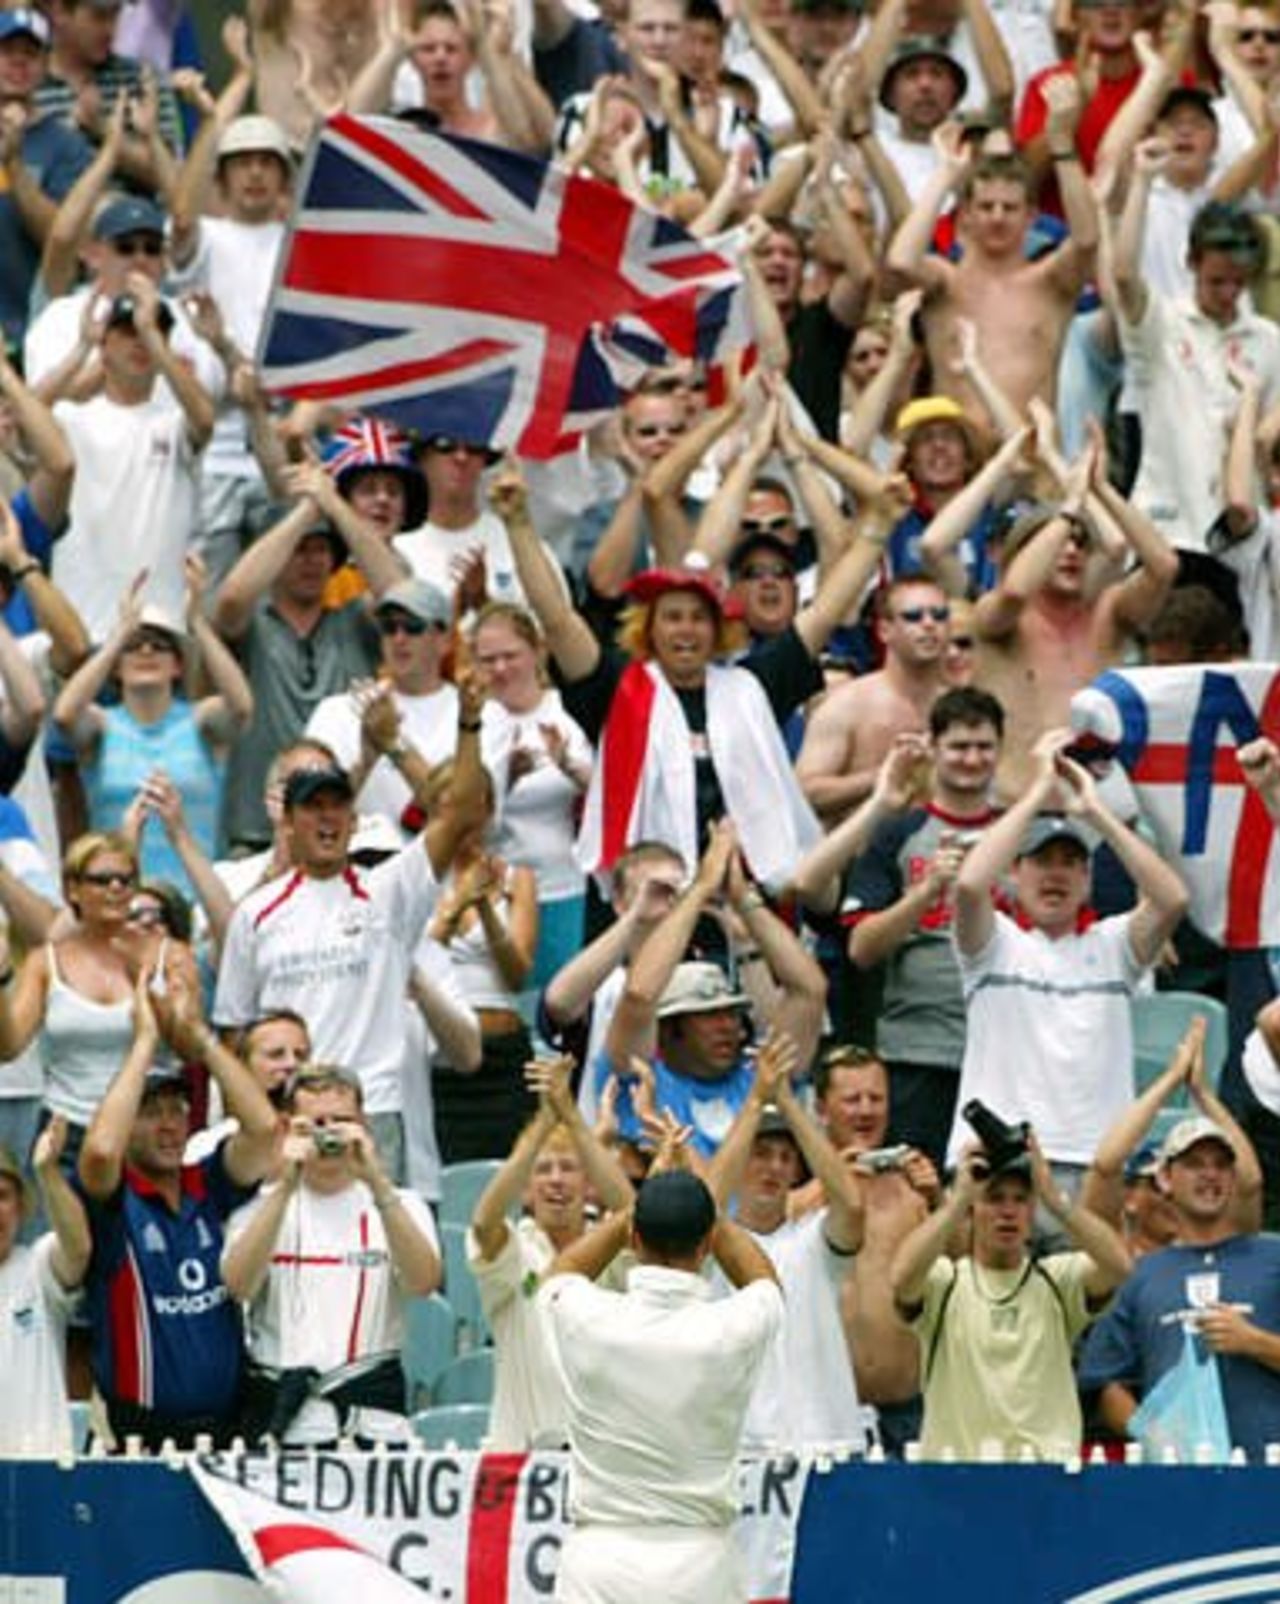 Nasser Hussain applauds England's travelling Barmy Army fans following the conclusion of the Melbourne Test, Mon 30 Dec 2002